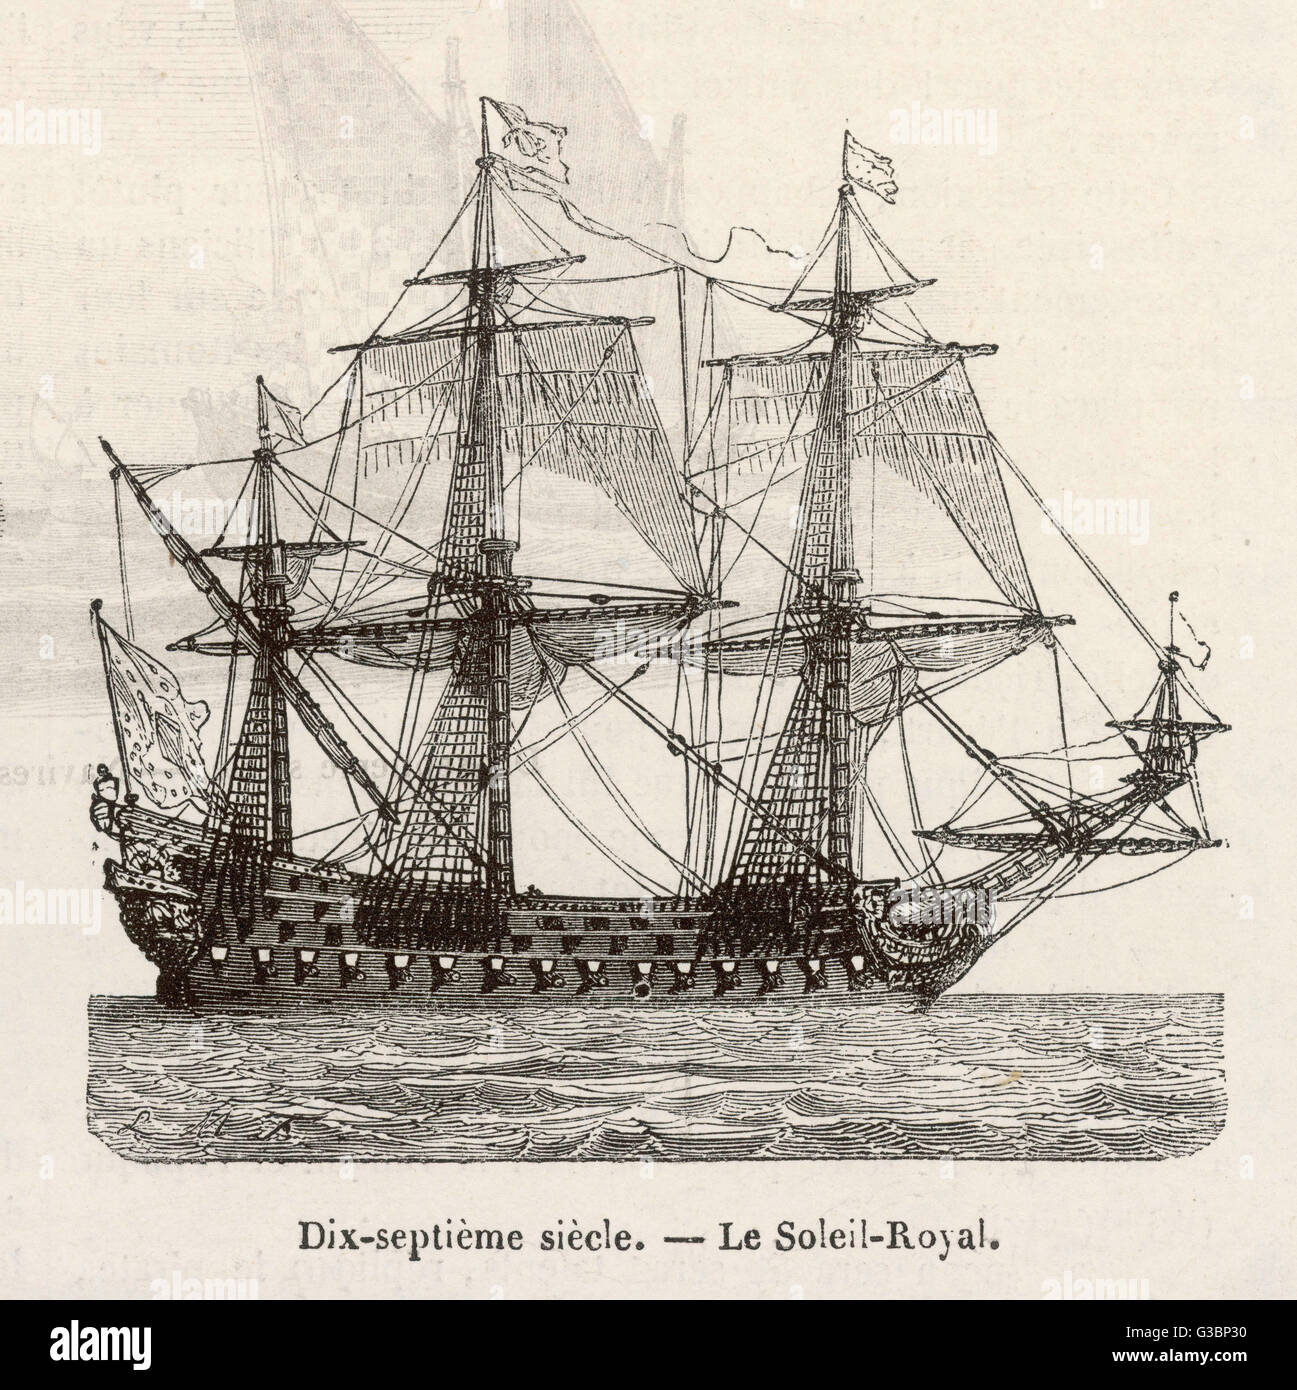 A Seventeenth century French  warship         Date: 17th century Stock Photo